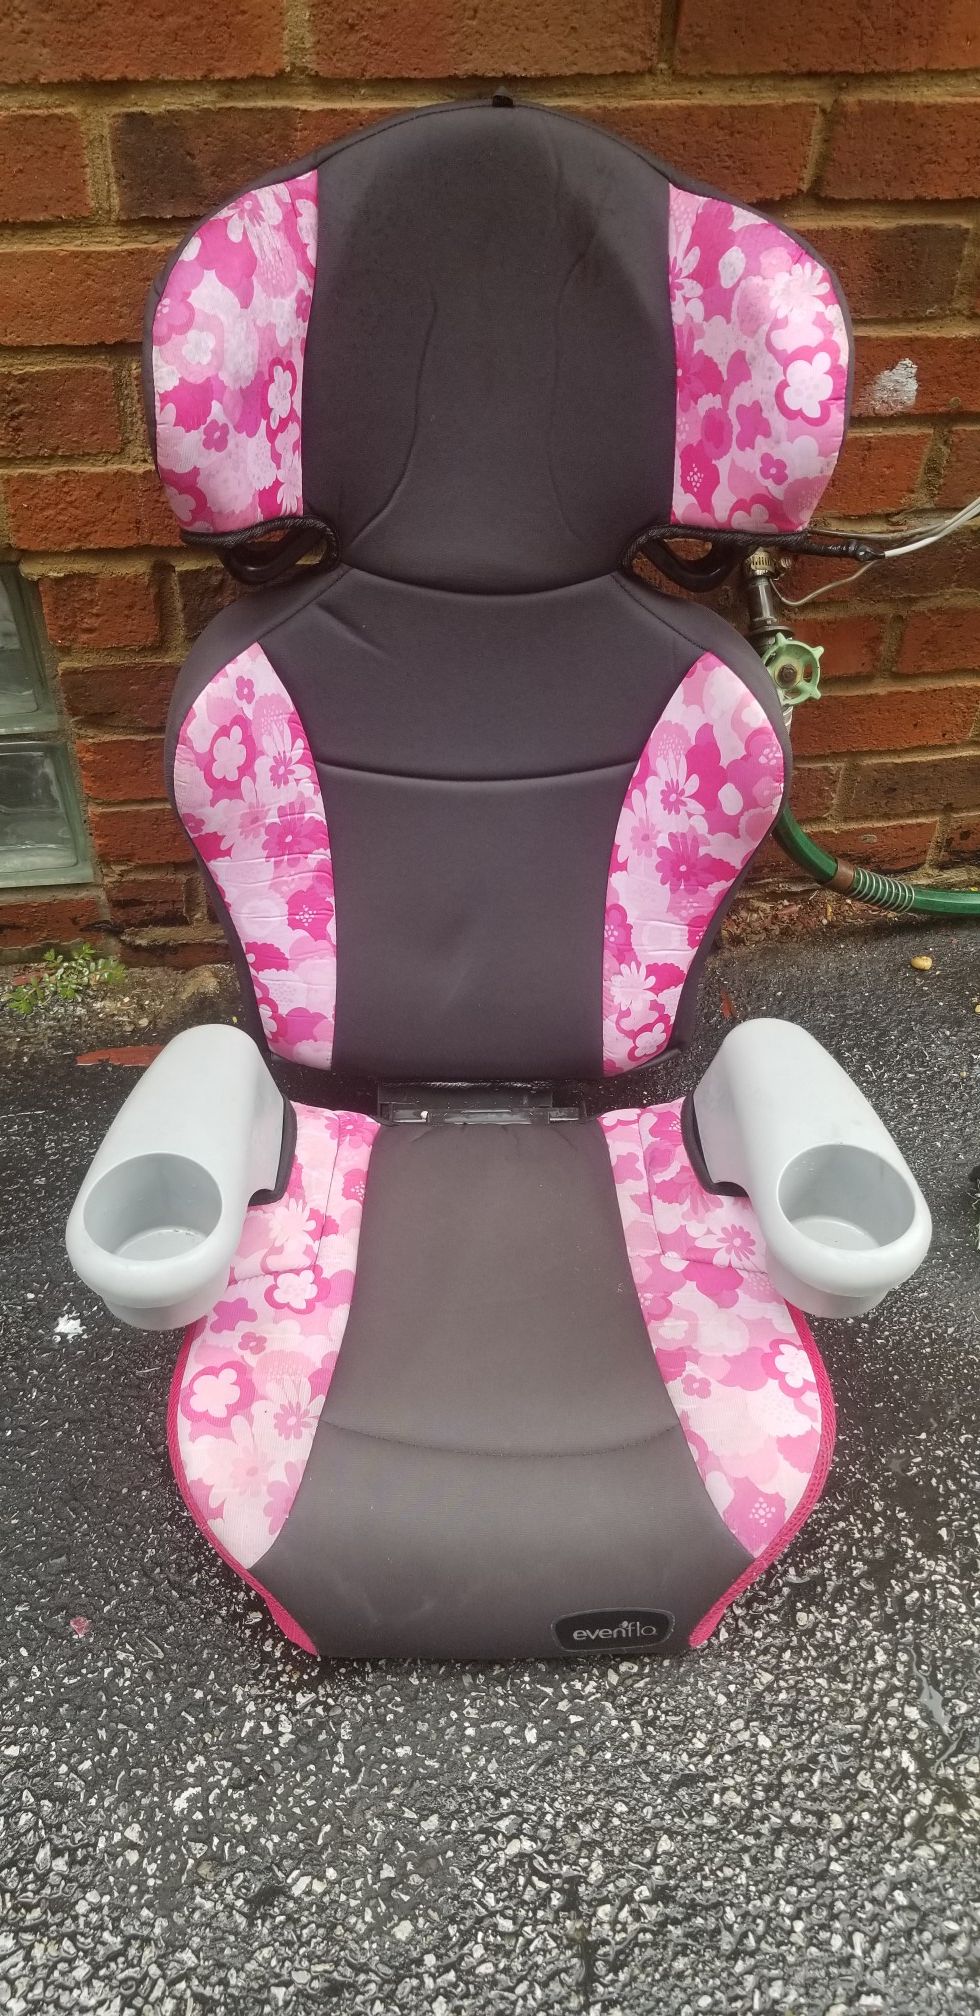 Evenflo car seat / Booster seat